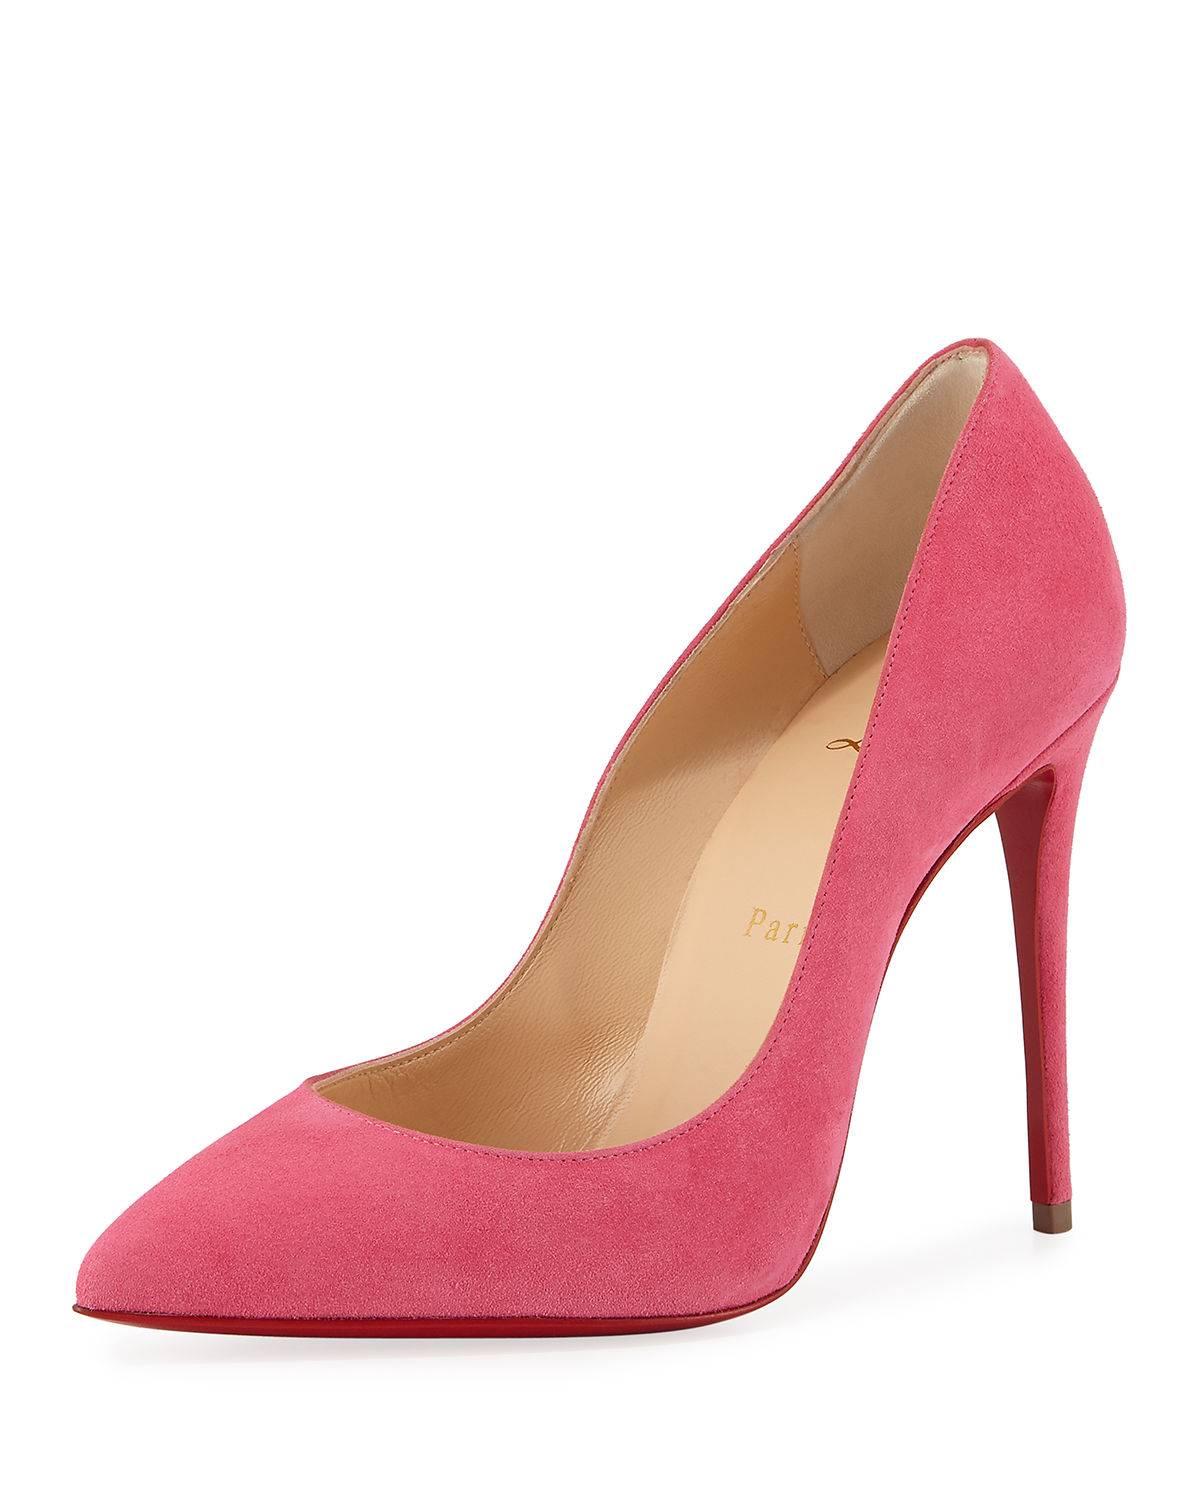 Christian Louboutin New Pink Suede Pigalle Follie High Heels Pumps in Box 
Size IT 36 
Suede
Slip on 
Made in Italy 
Heel height 4.3